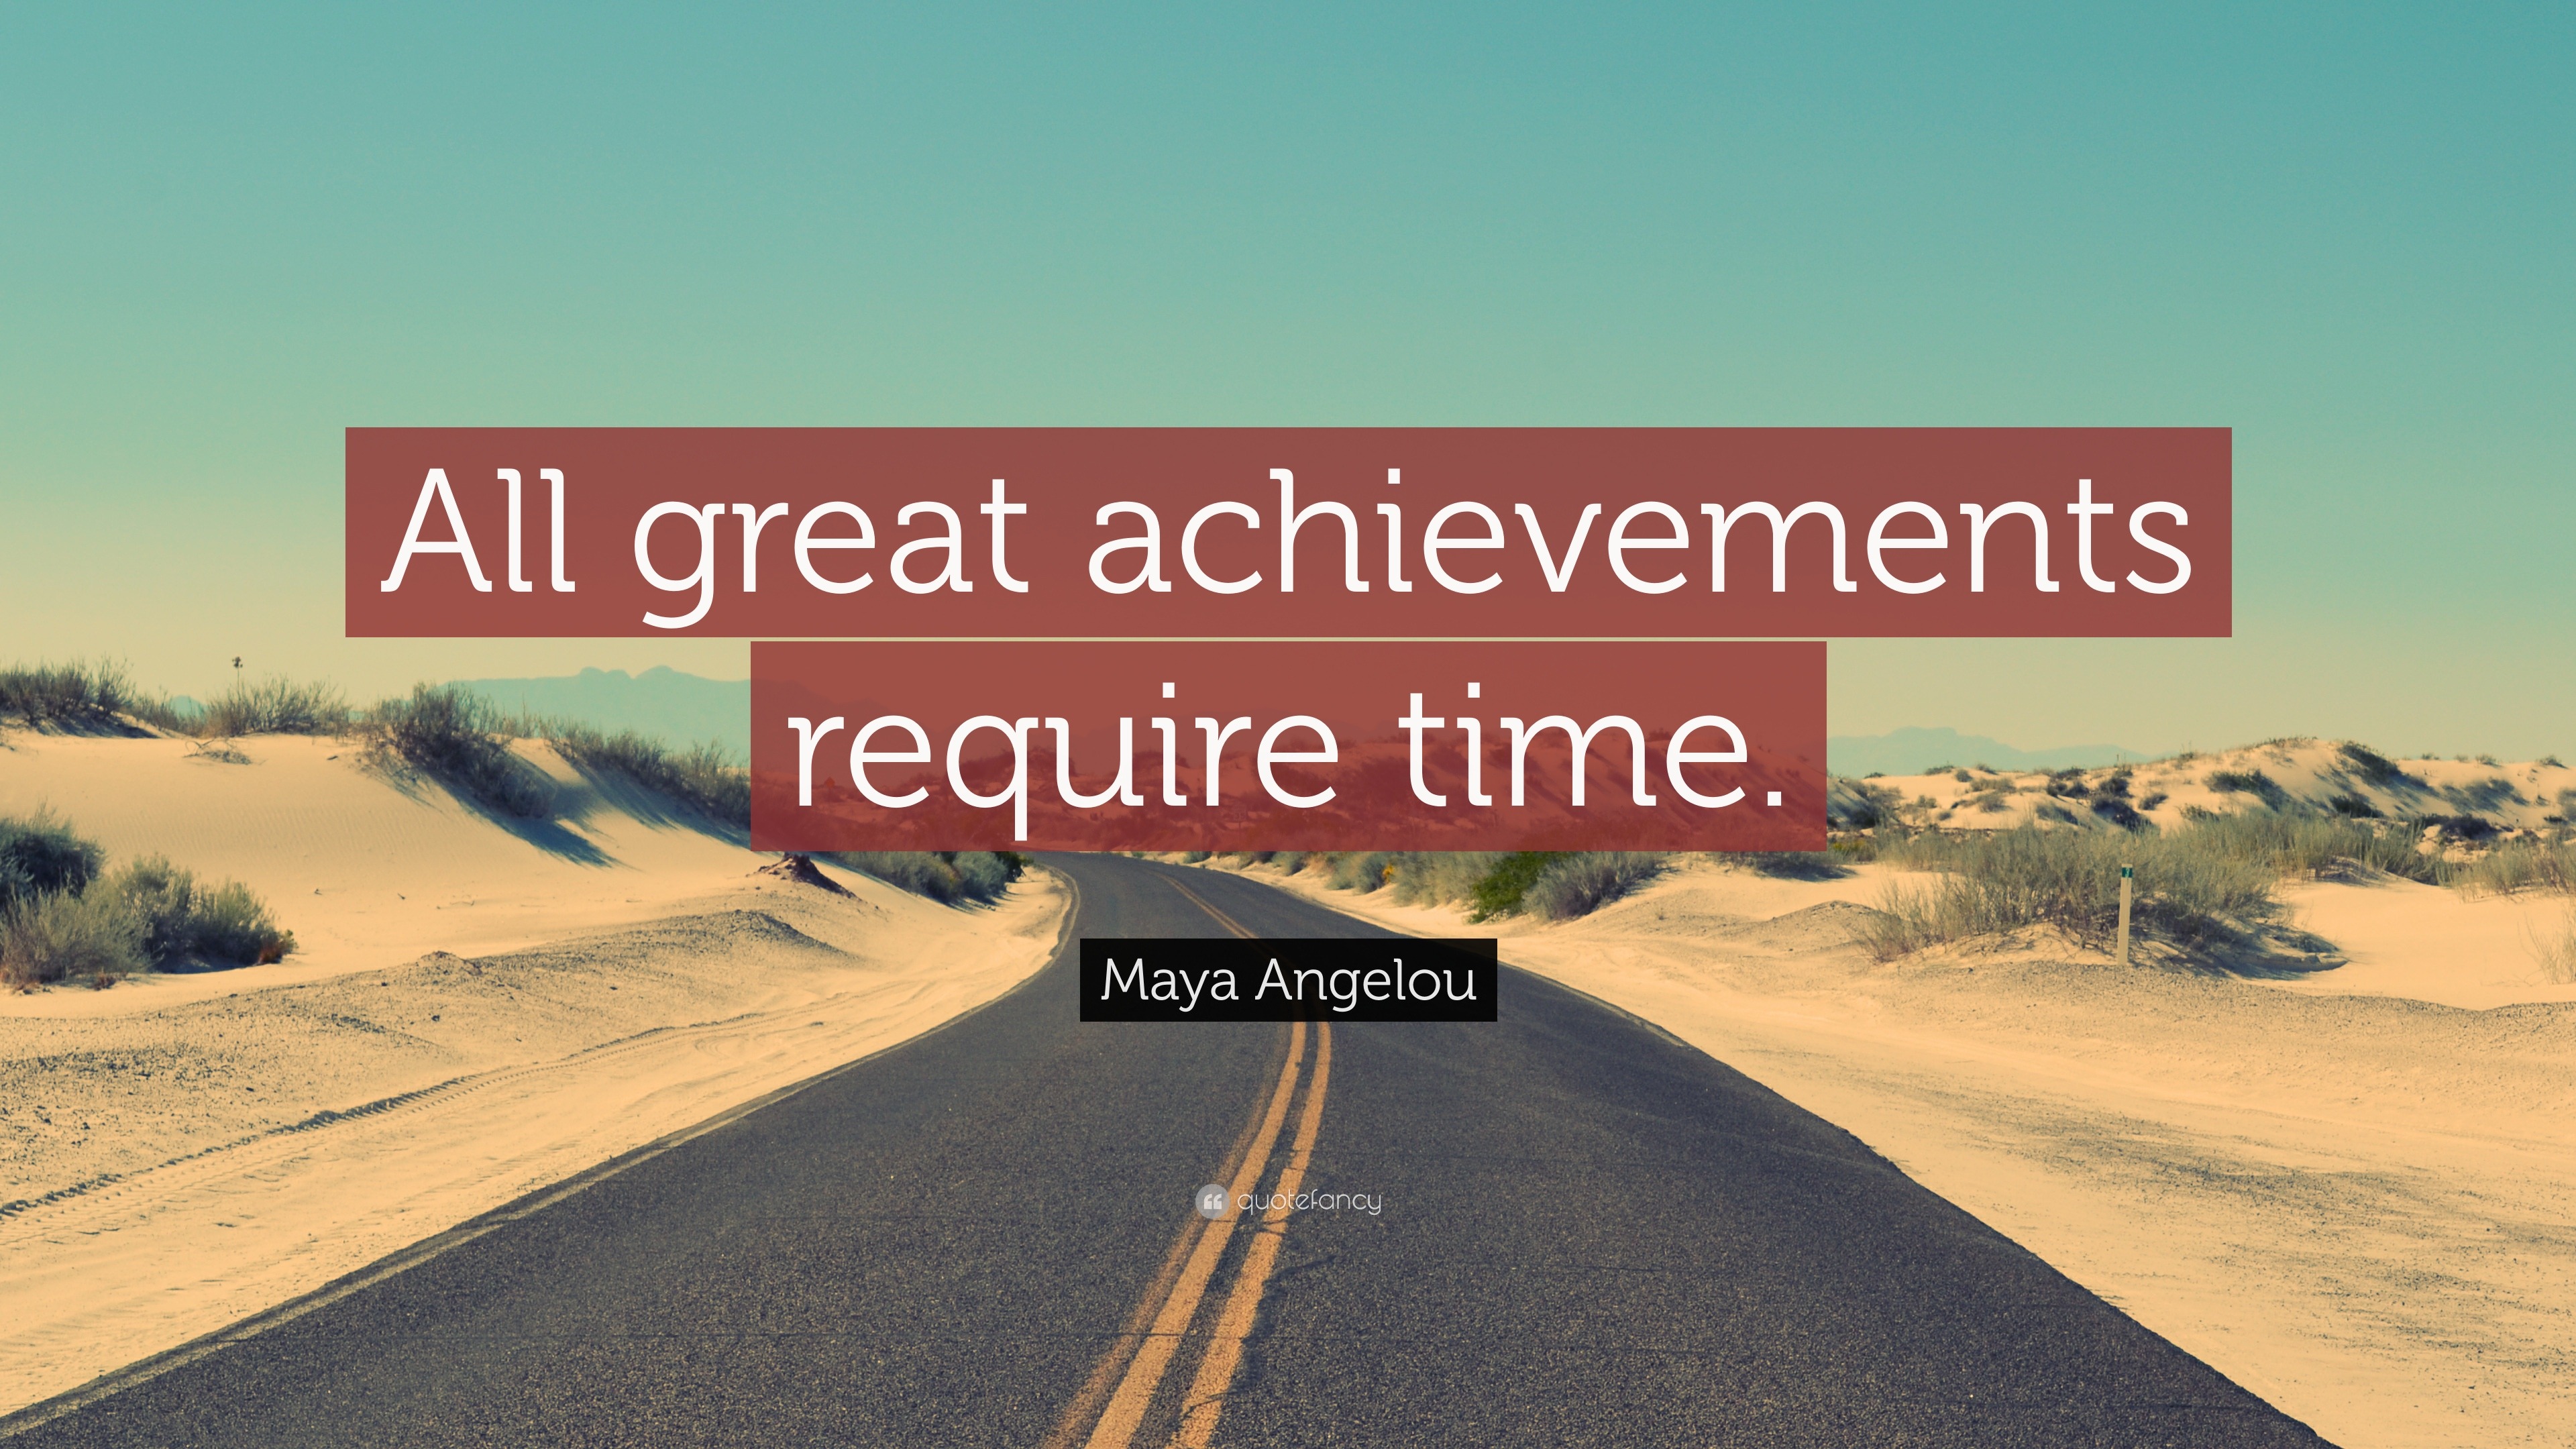 Maya Angelou Quote: "All great achievements require time."